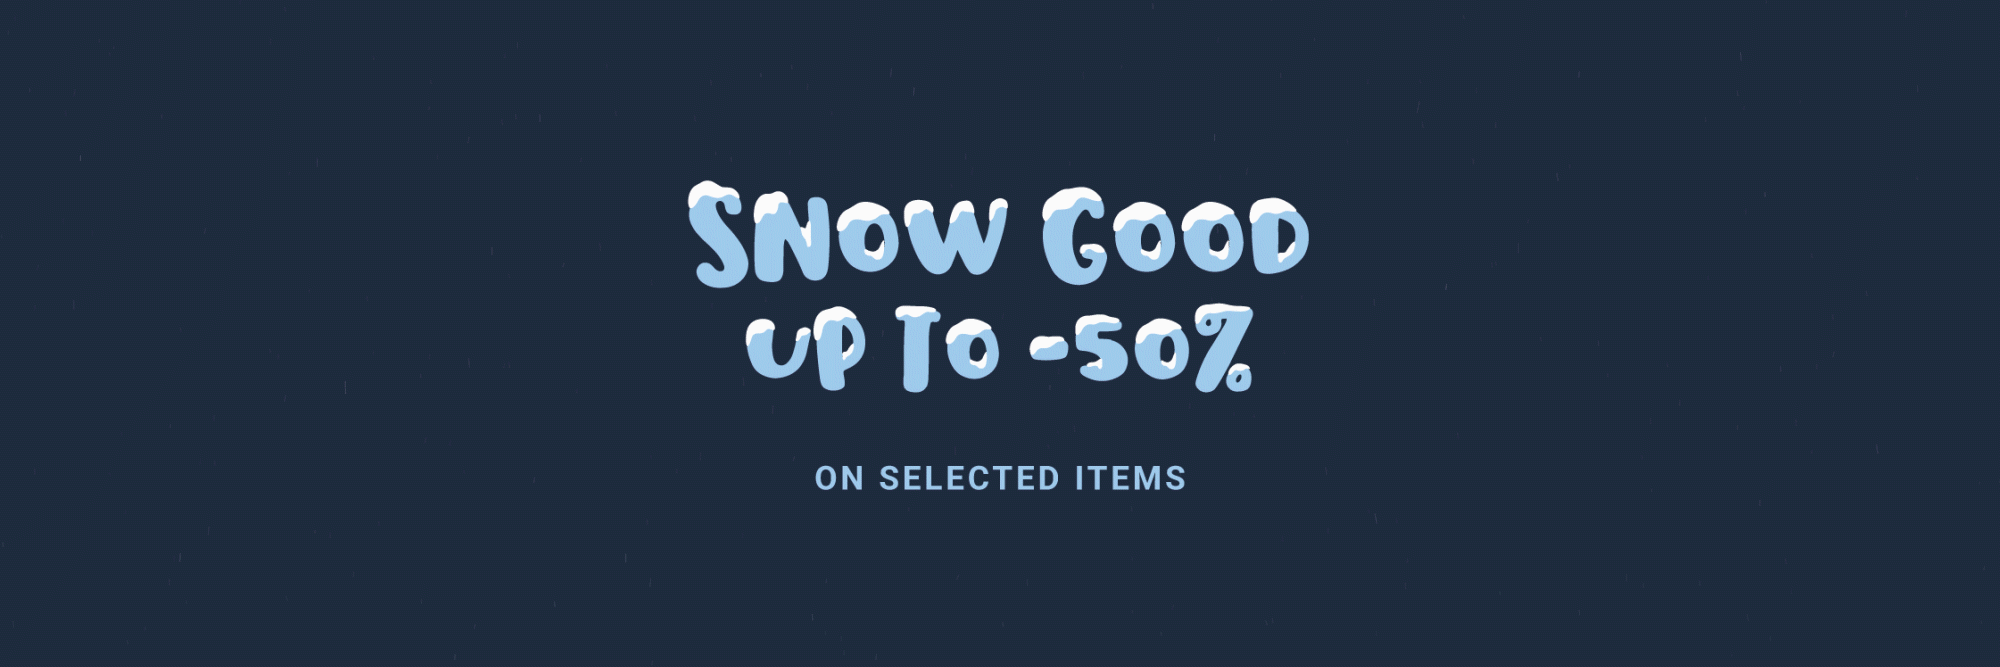 SNOW GOOD UP TO -50%